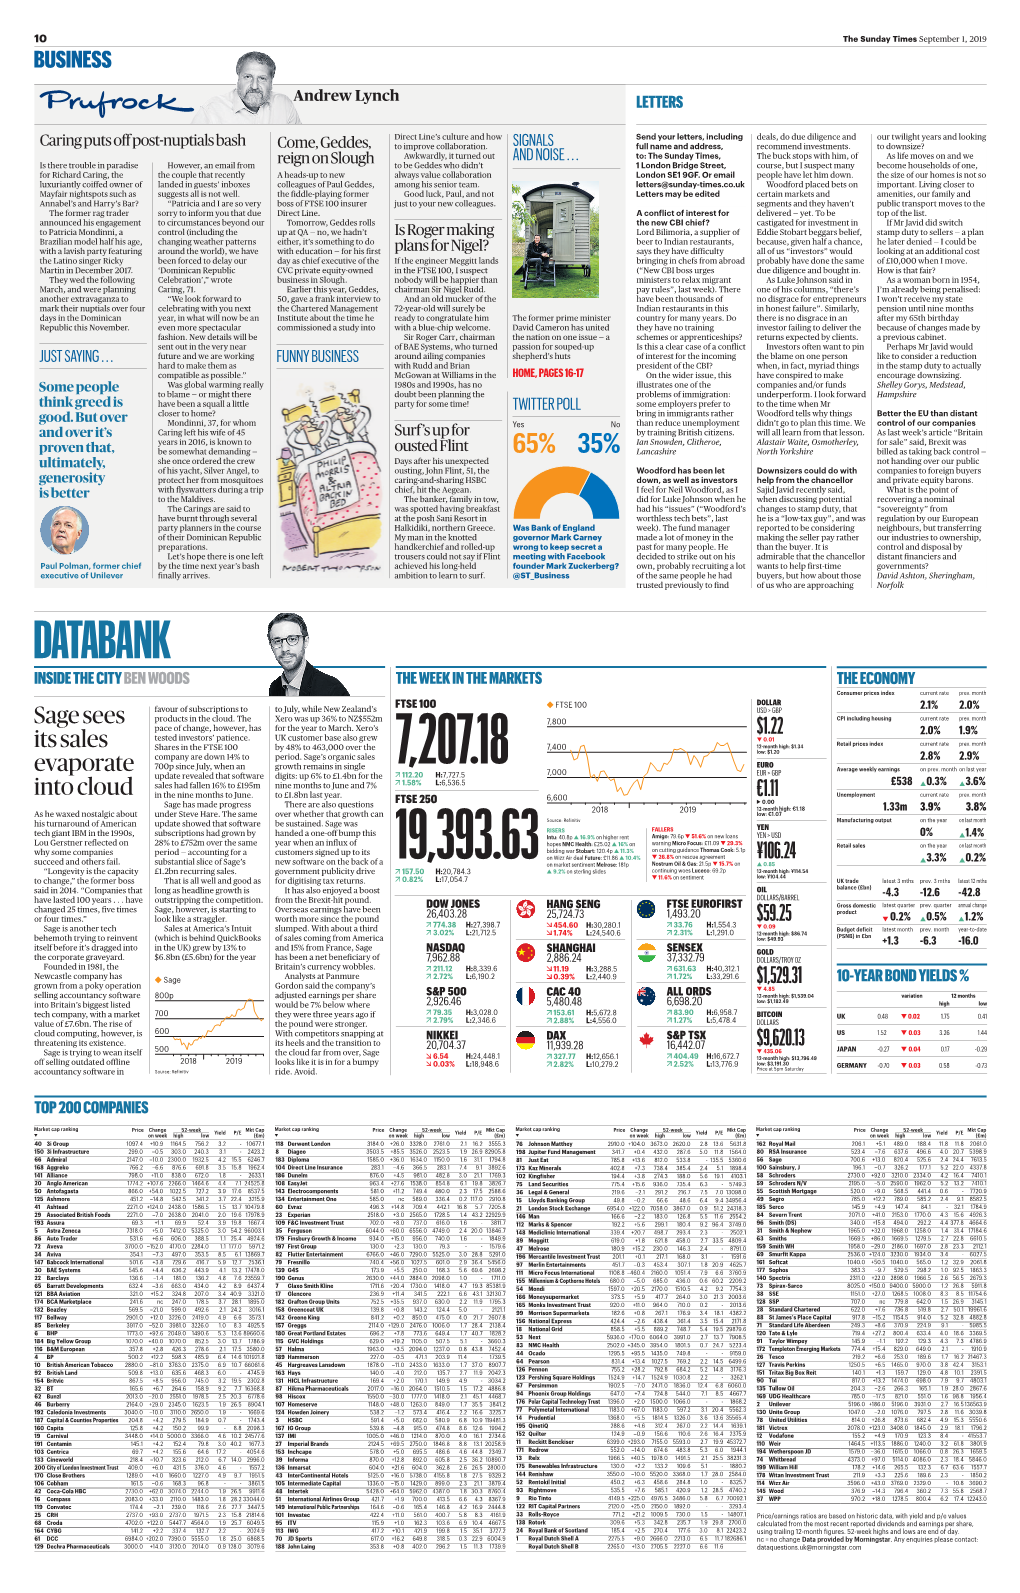 DATABANK INSIDE the CITY BEN WOODS the WEEK in the MARKETS the ECONOMY Consumer Prices Index Current Rate Prev